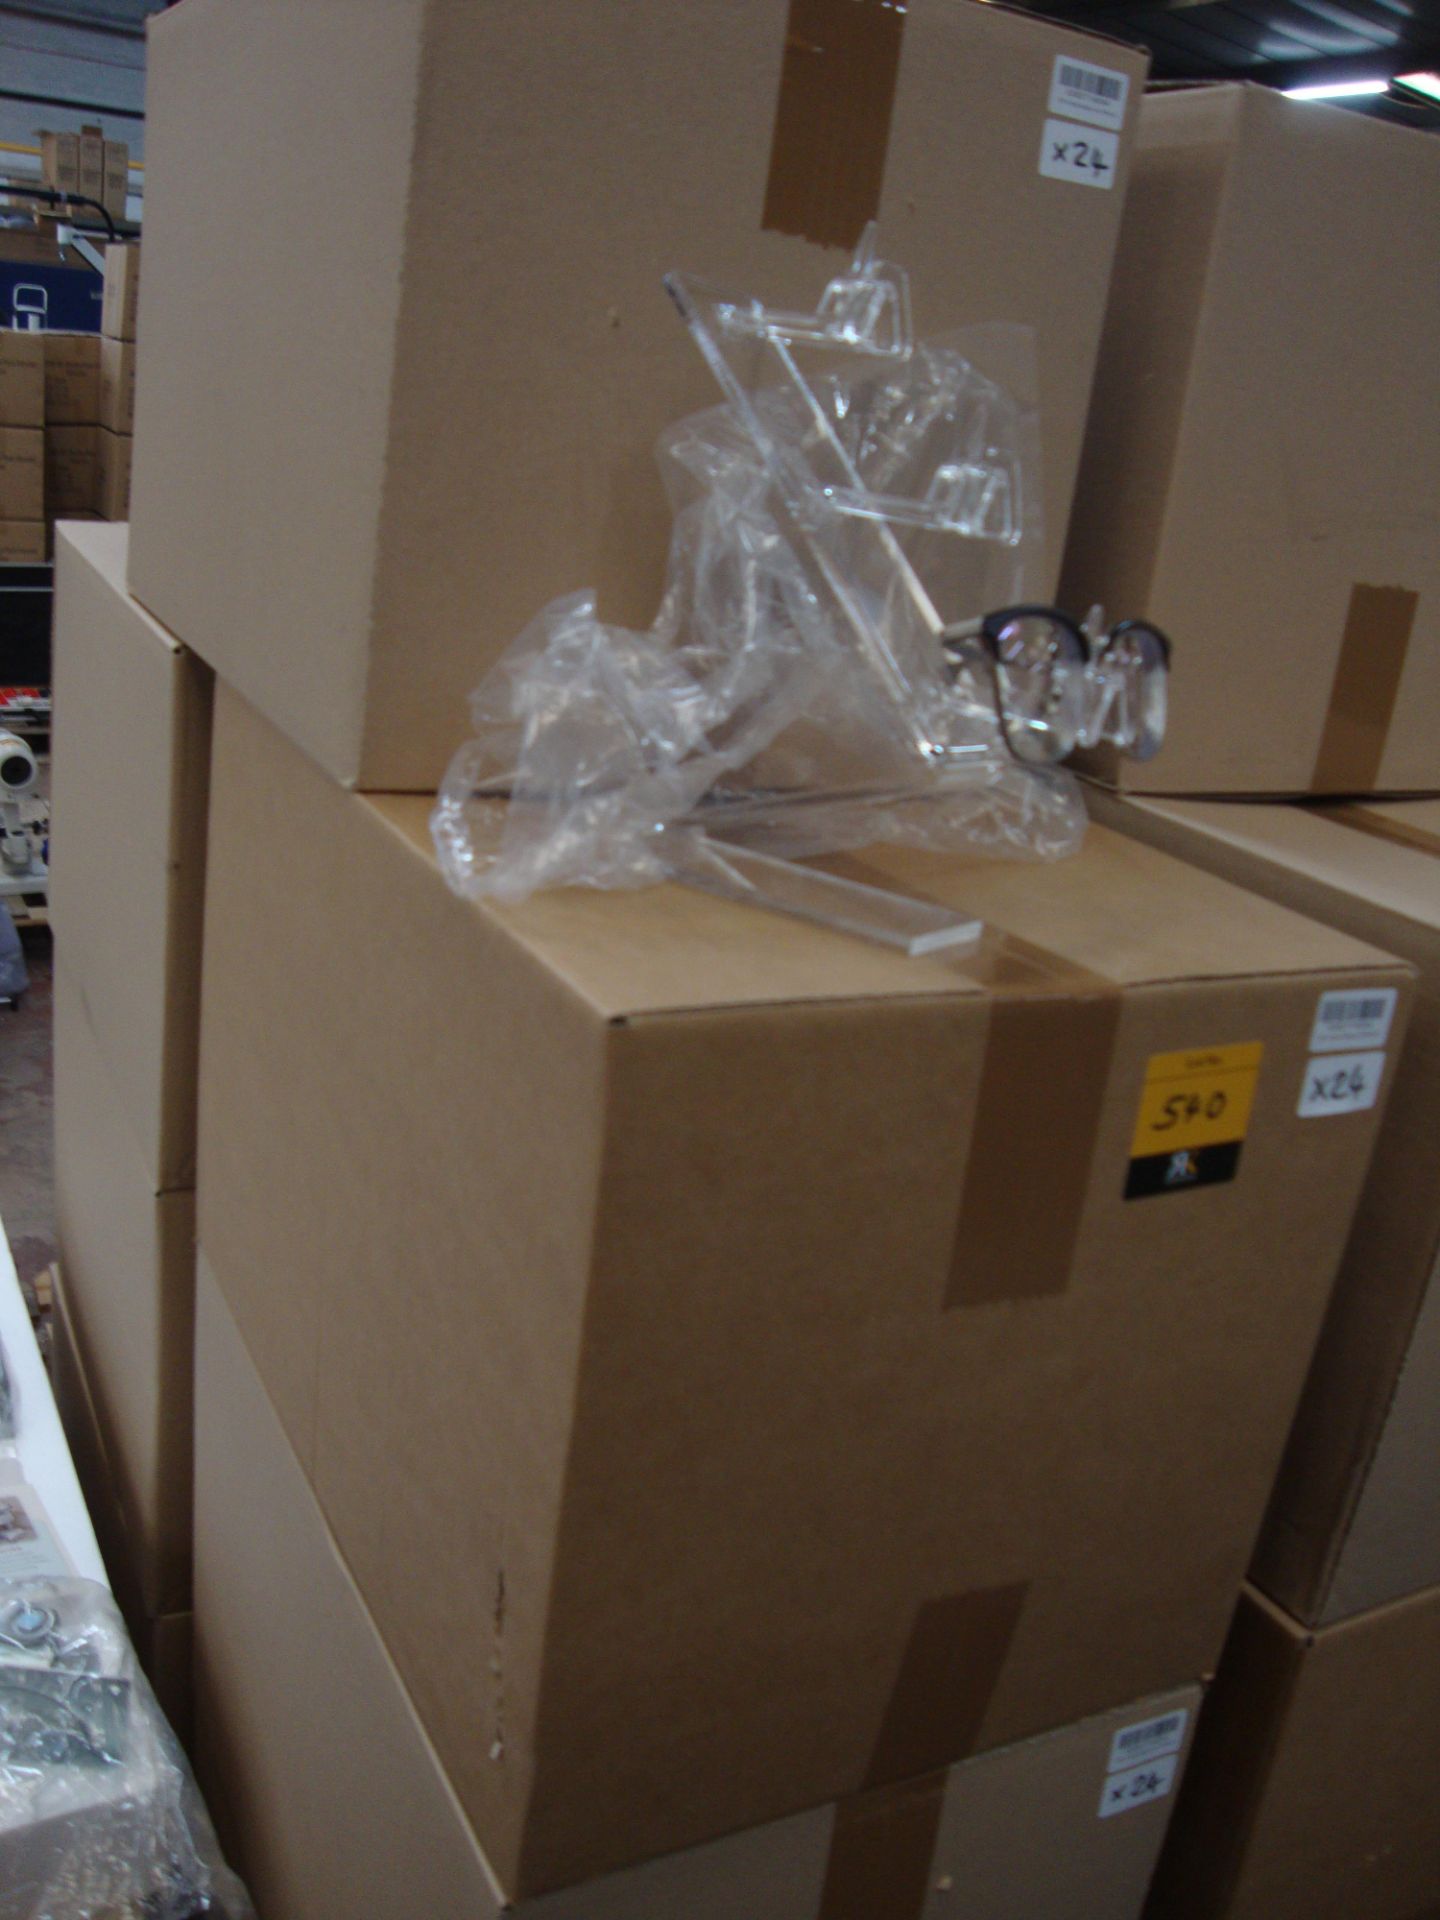 9 boxes containing a total of approx. 110 acrylic freestanding display stands capable of